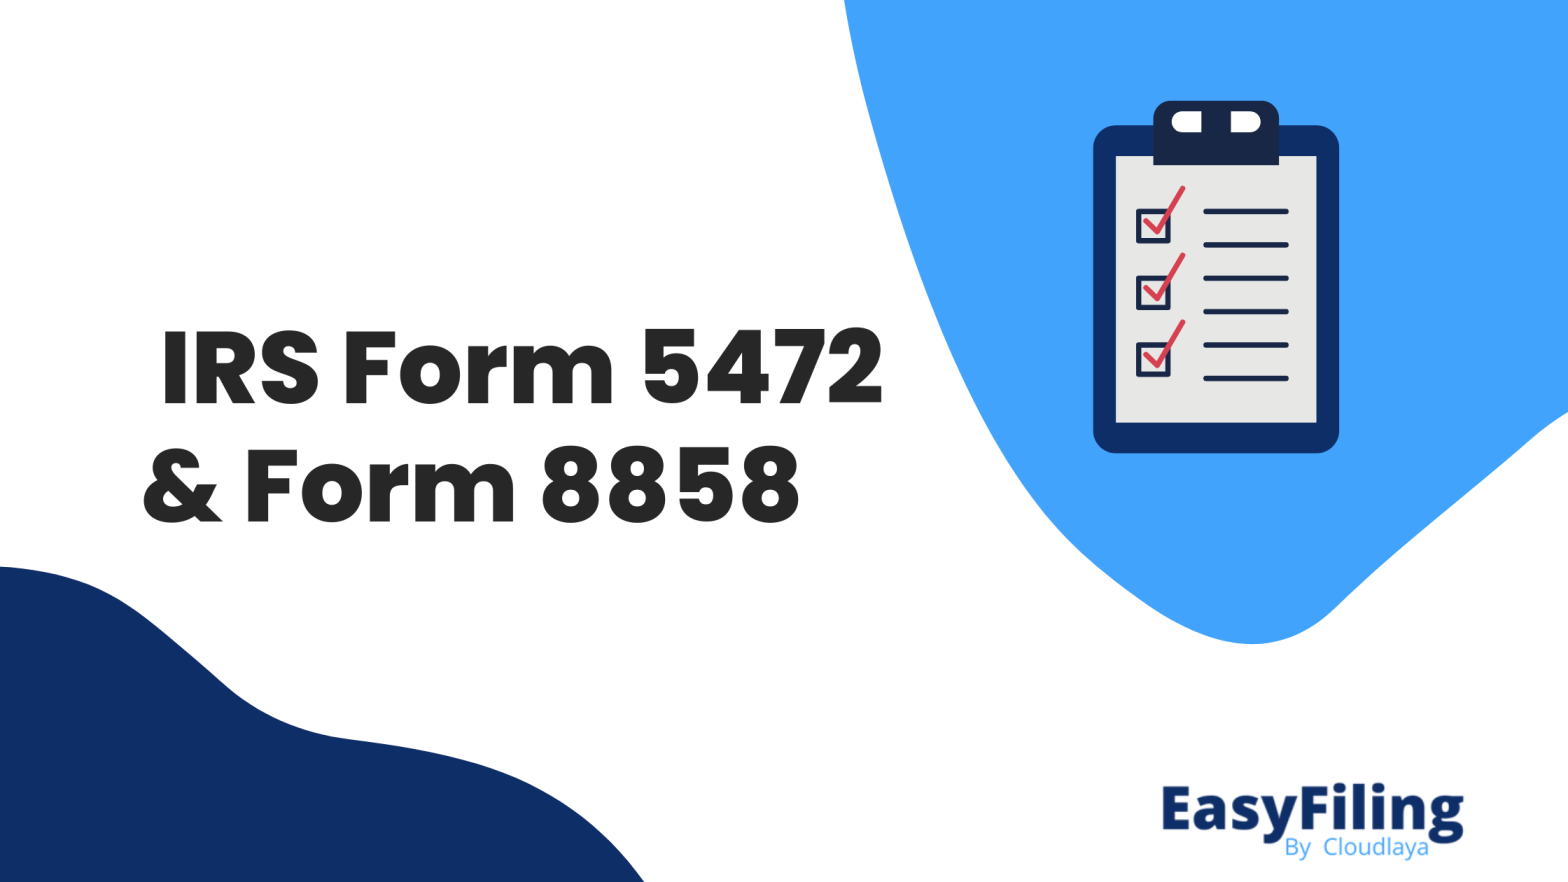 What you need to know about IRS Forms 5472, 1040NR, and 8858